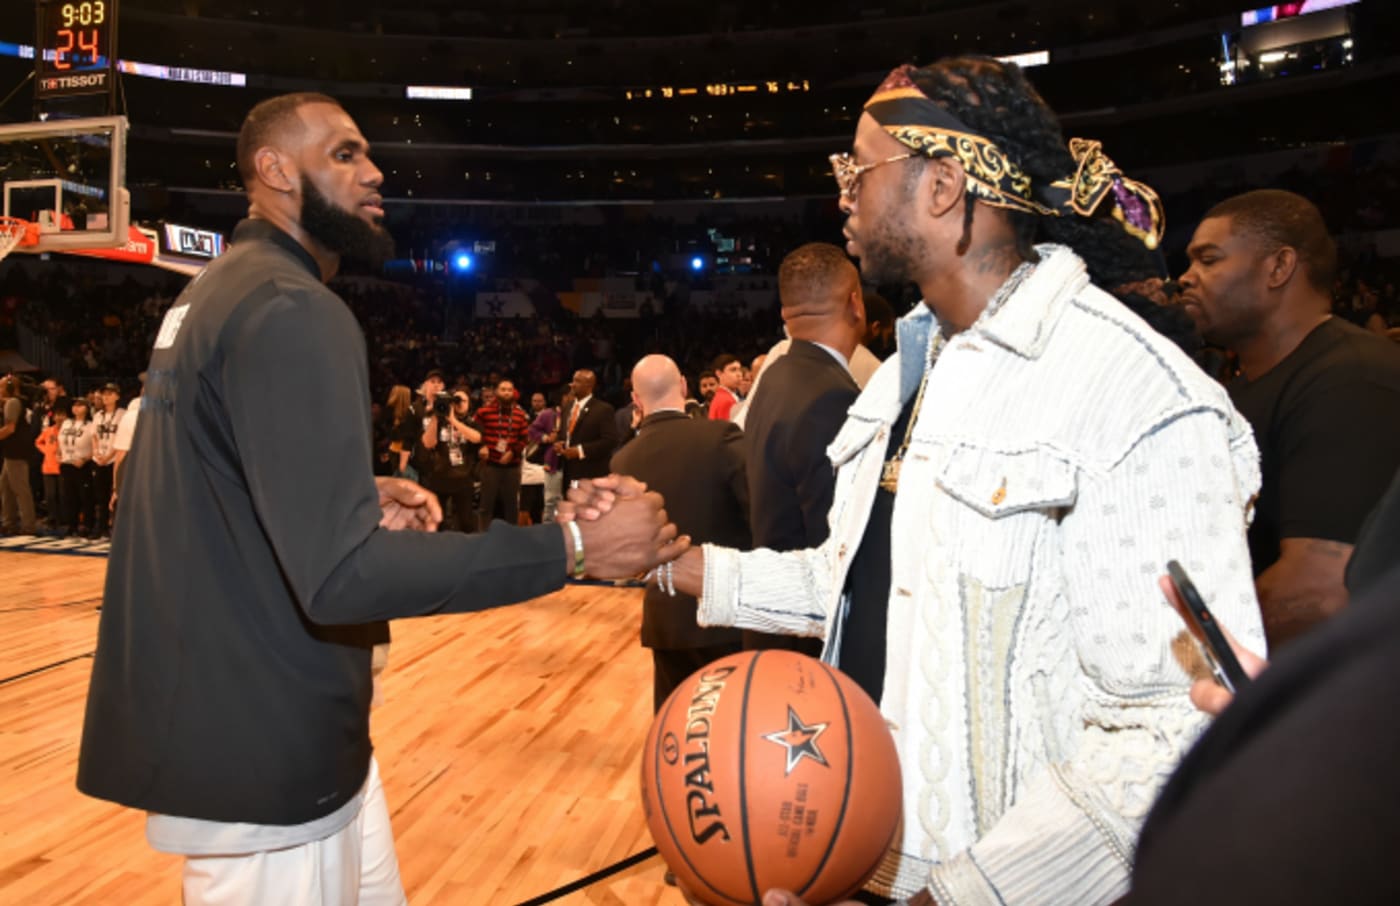 LeBron James (L) and 2 Chainz